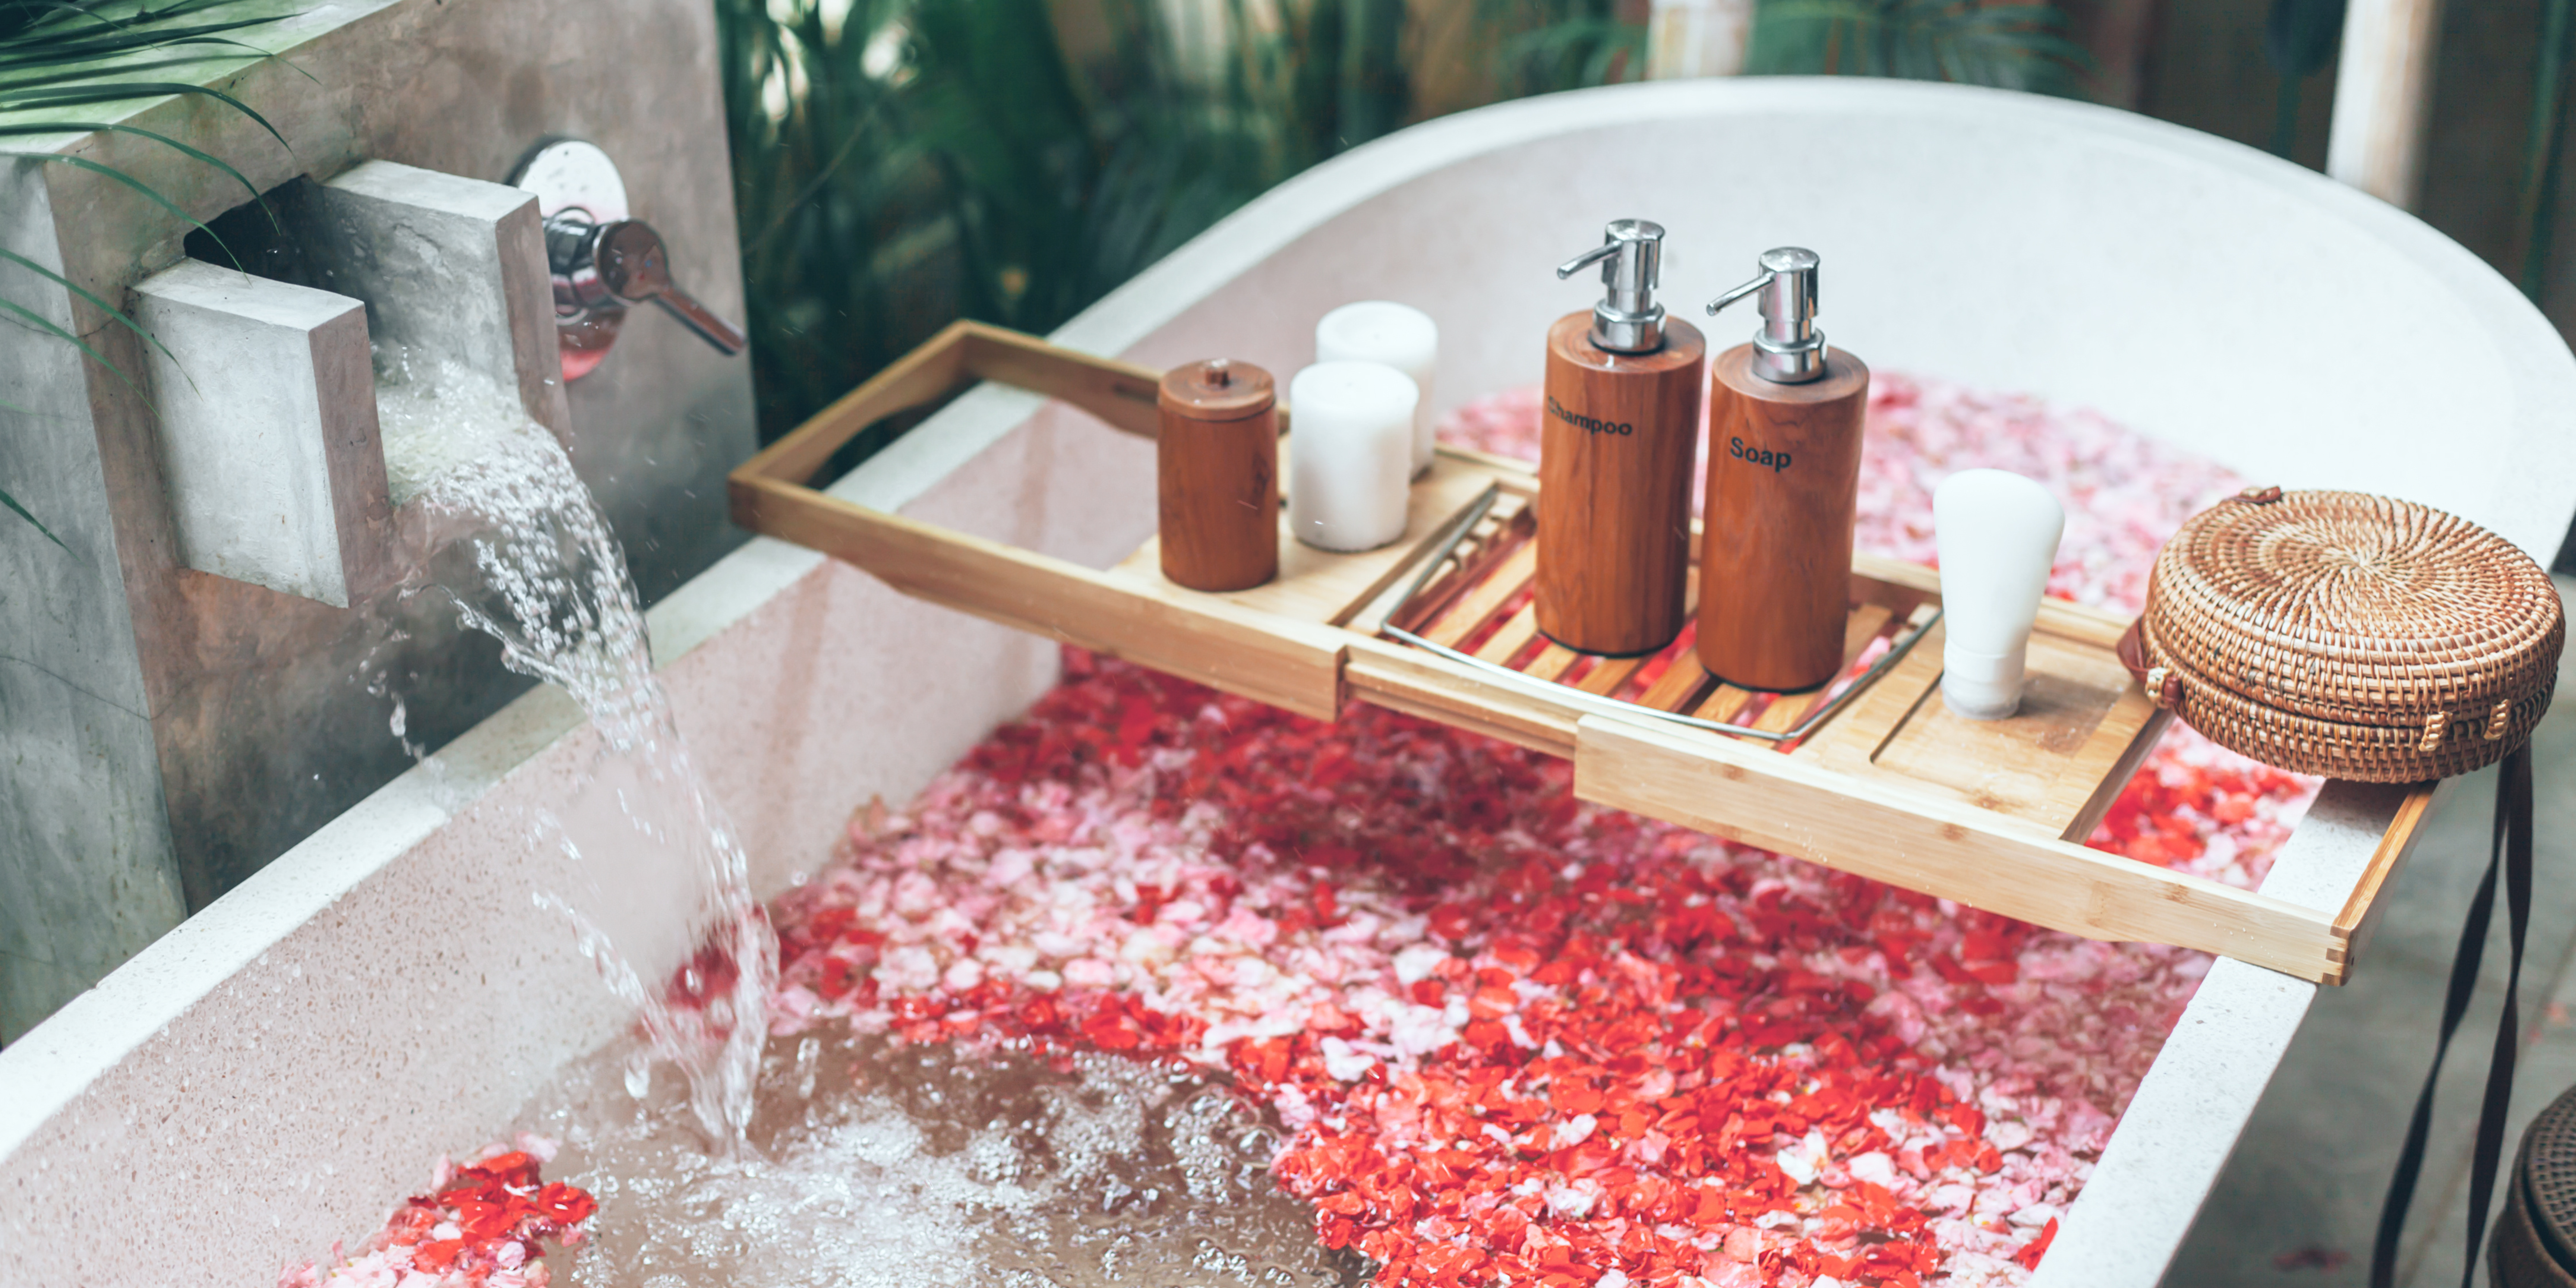 Luxurious full bathroom makeover featuring a curved bathtub with rose petals floating in water, complemented by a wooden bath tray holding eco-friendly bath products, a woven basket, and a serene backdrop of lush greenery.
